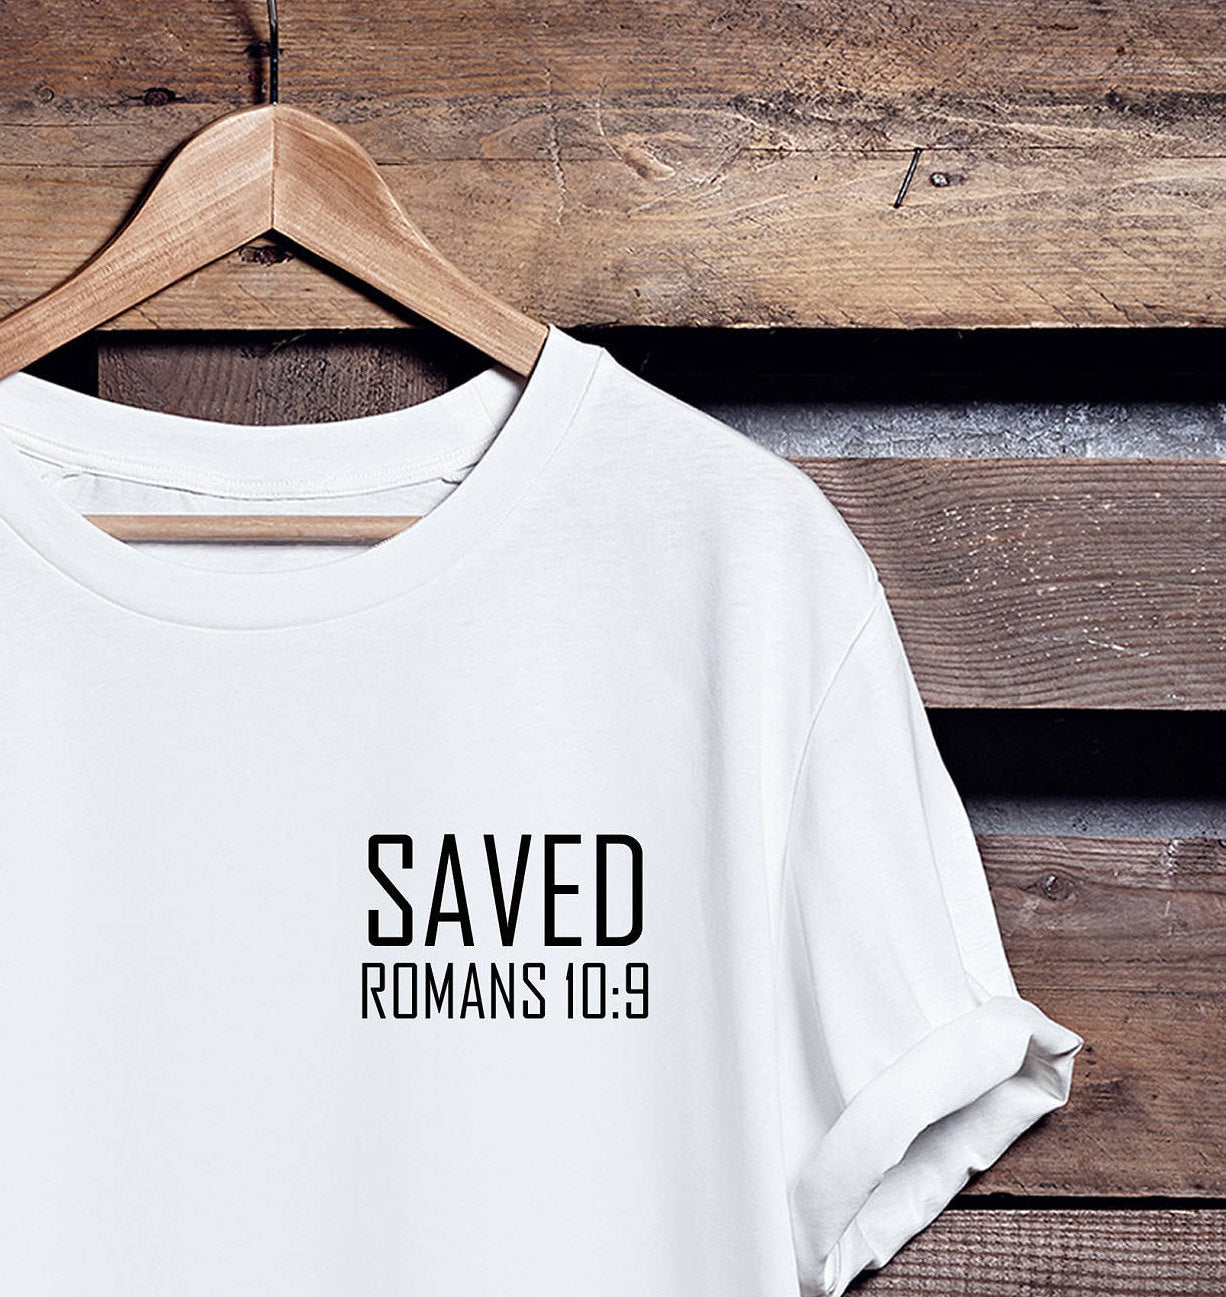 Saved T-shirt - Romans 10 - Guestbookery